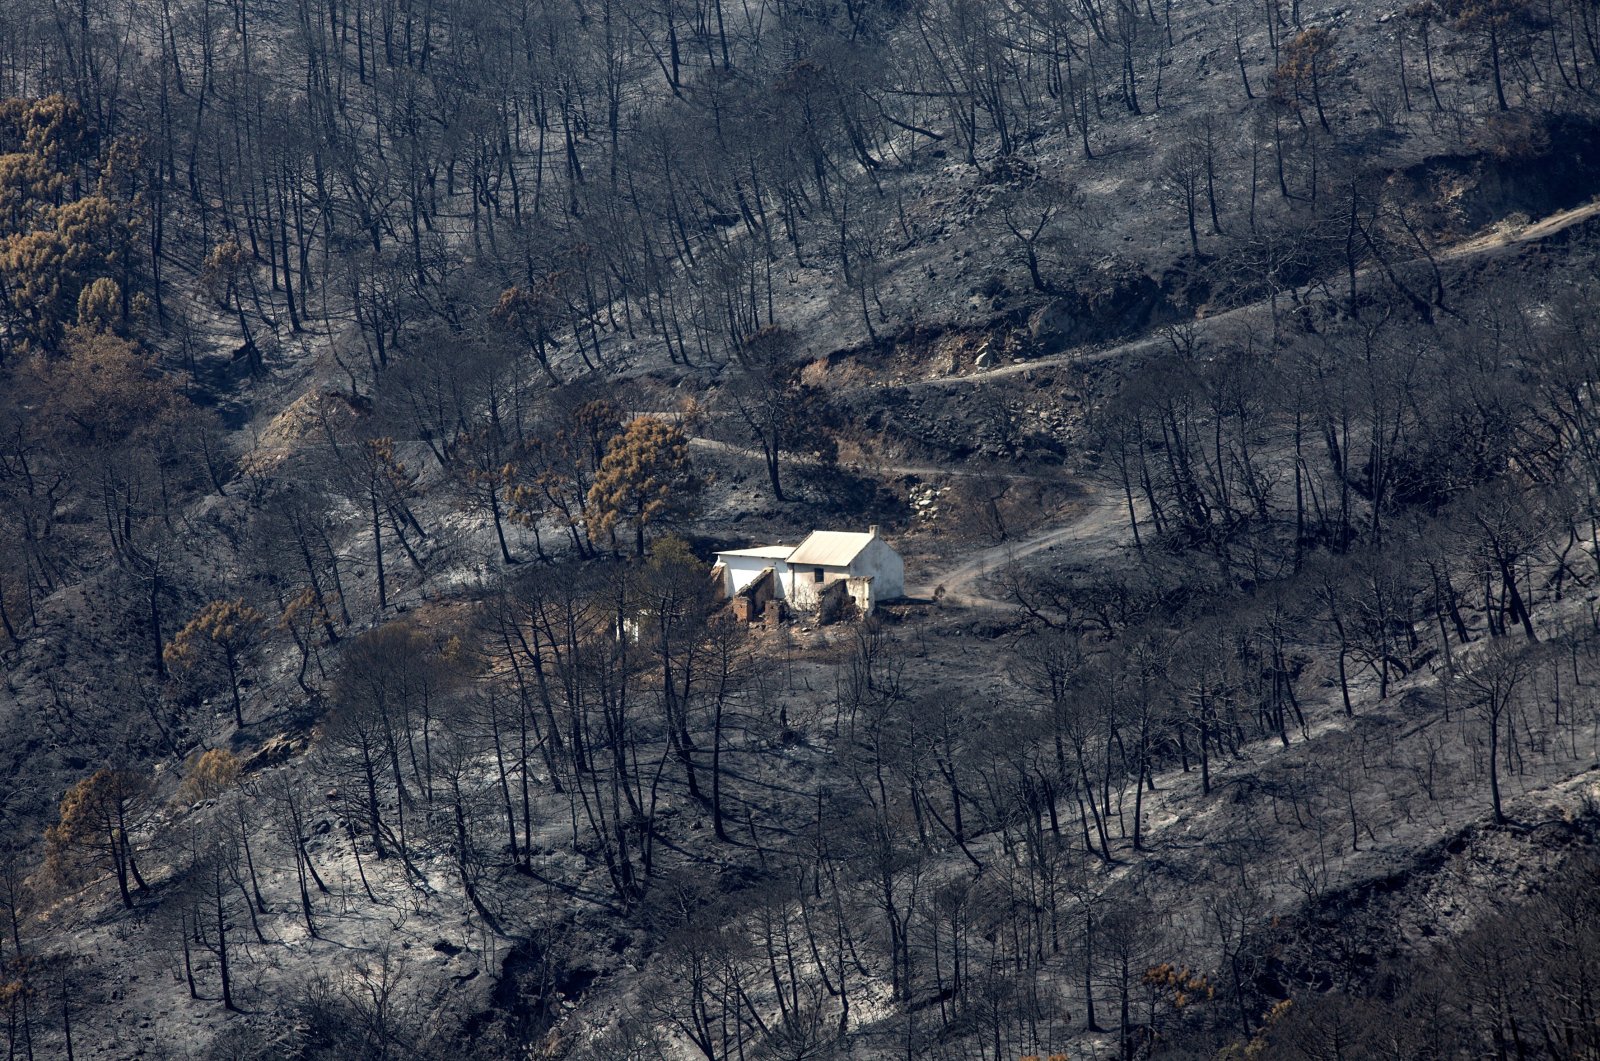 A house stands in the middle of an area devastated by the forest fire in Sierra Bermeja, Malaga, Spain, Sept. 11, 2021. (EPA Photo)